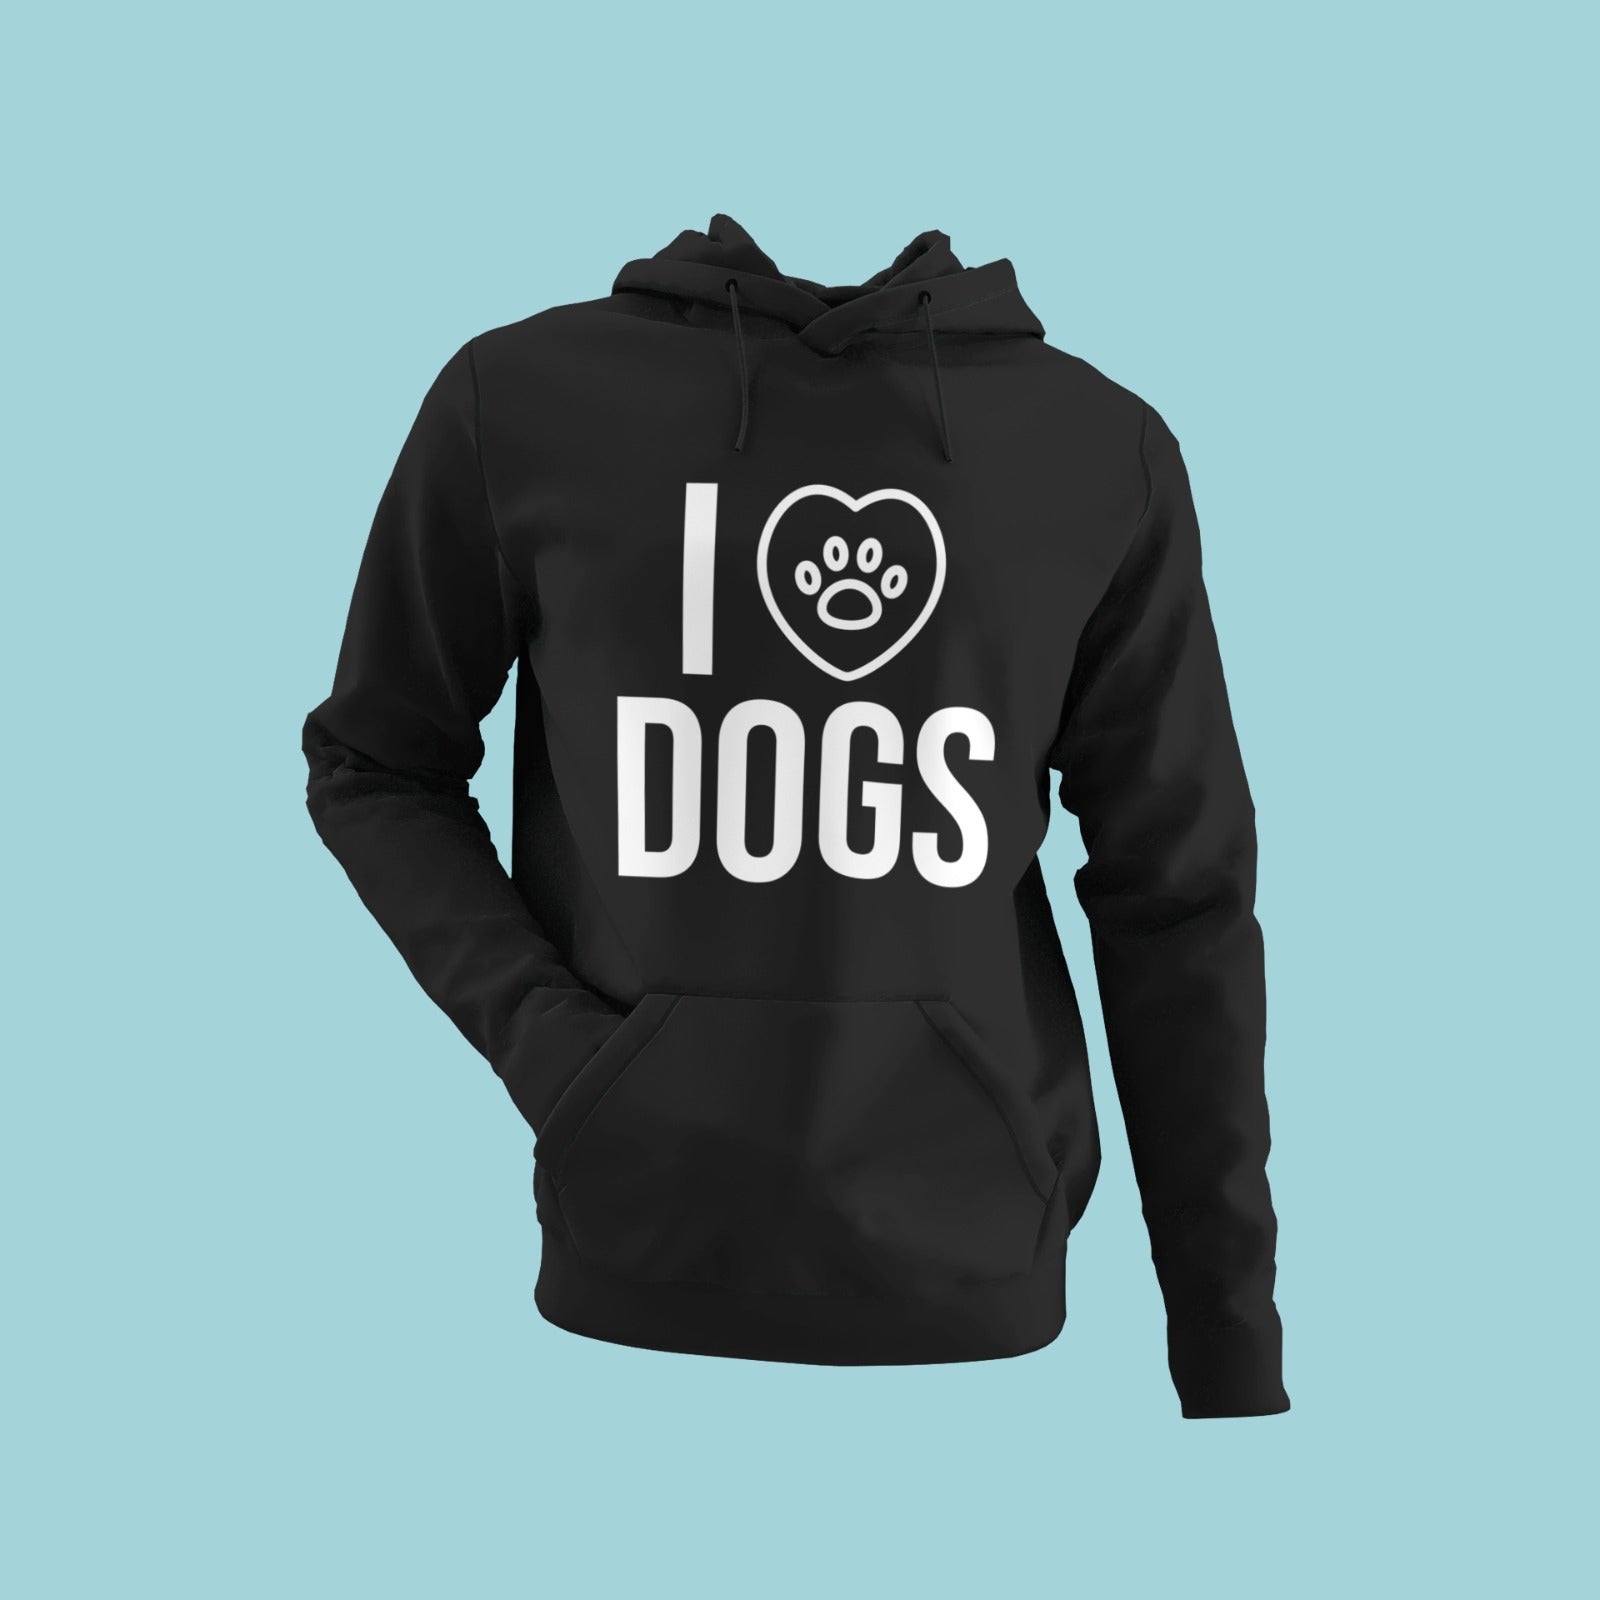  Show your love for furry friends with our black hoodie featuring the iconic "I ♥ dogs" message with a paw symbol. Made from high-quality fabric, this hoodie is comfortable, stylish, and built to last. Whether you're out on a walk or snuggling up at home, this hoodie is perfect for all dog enthusiasts. Don't wait, order yours today!